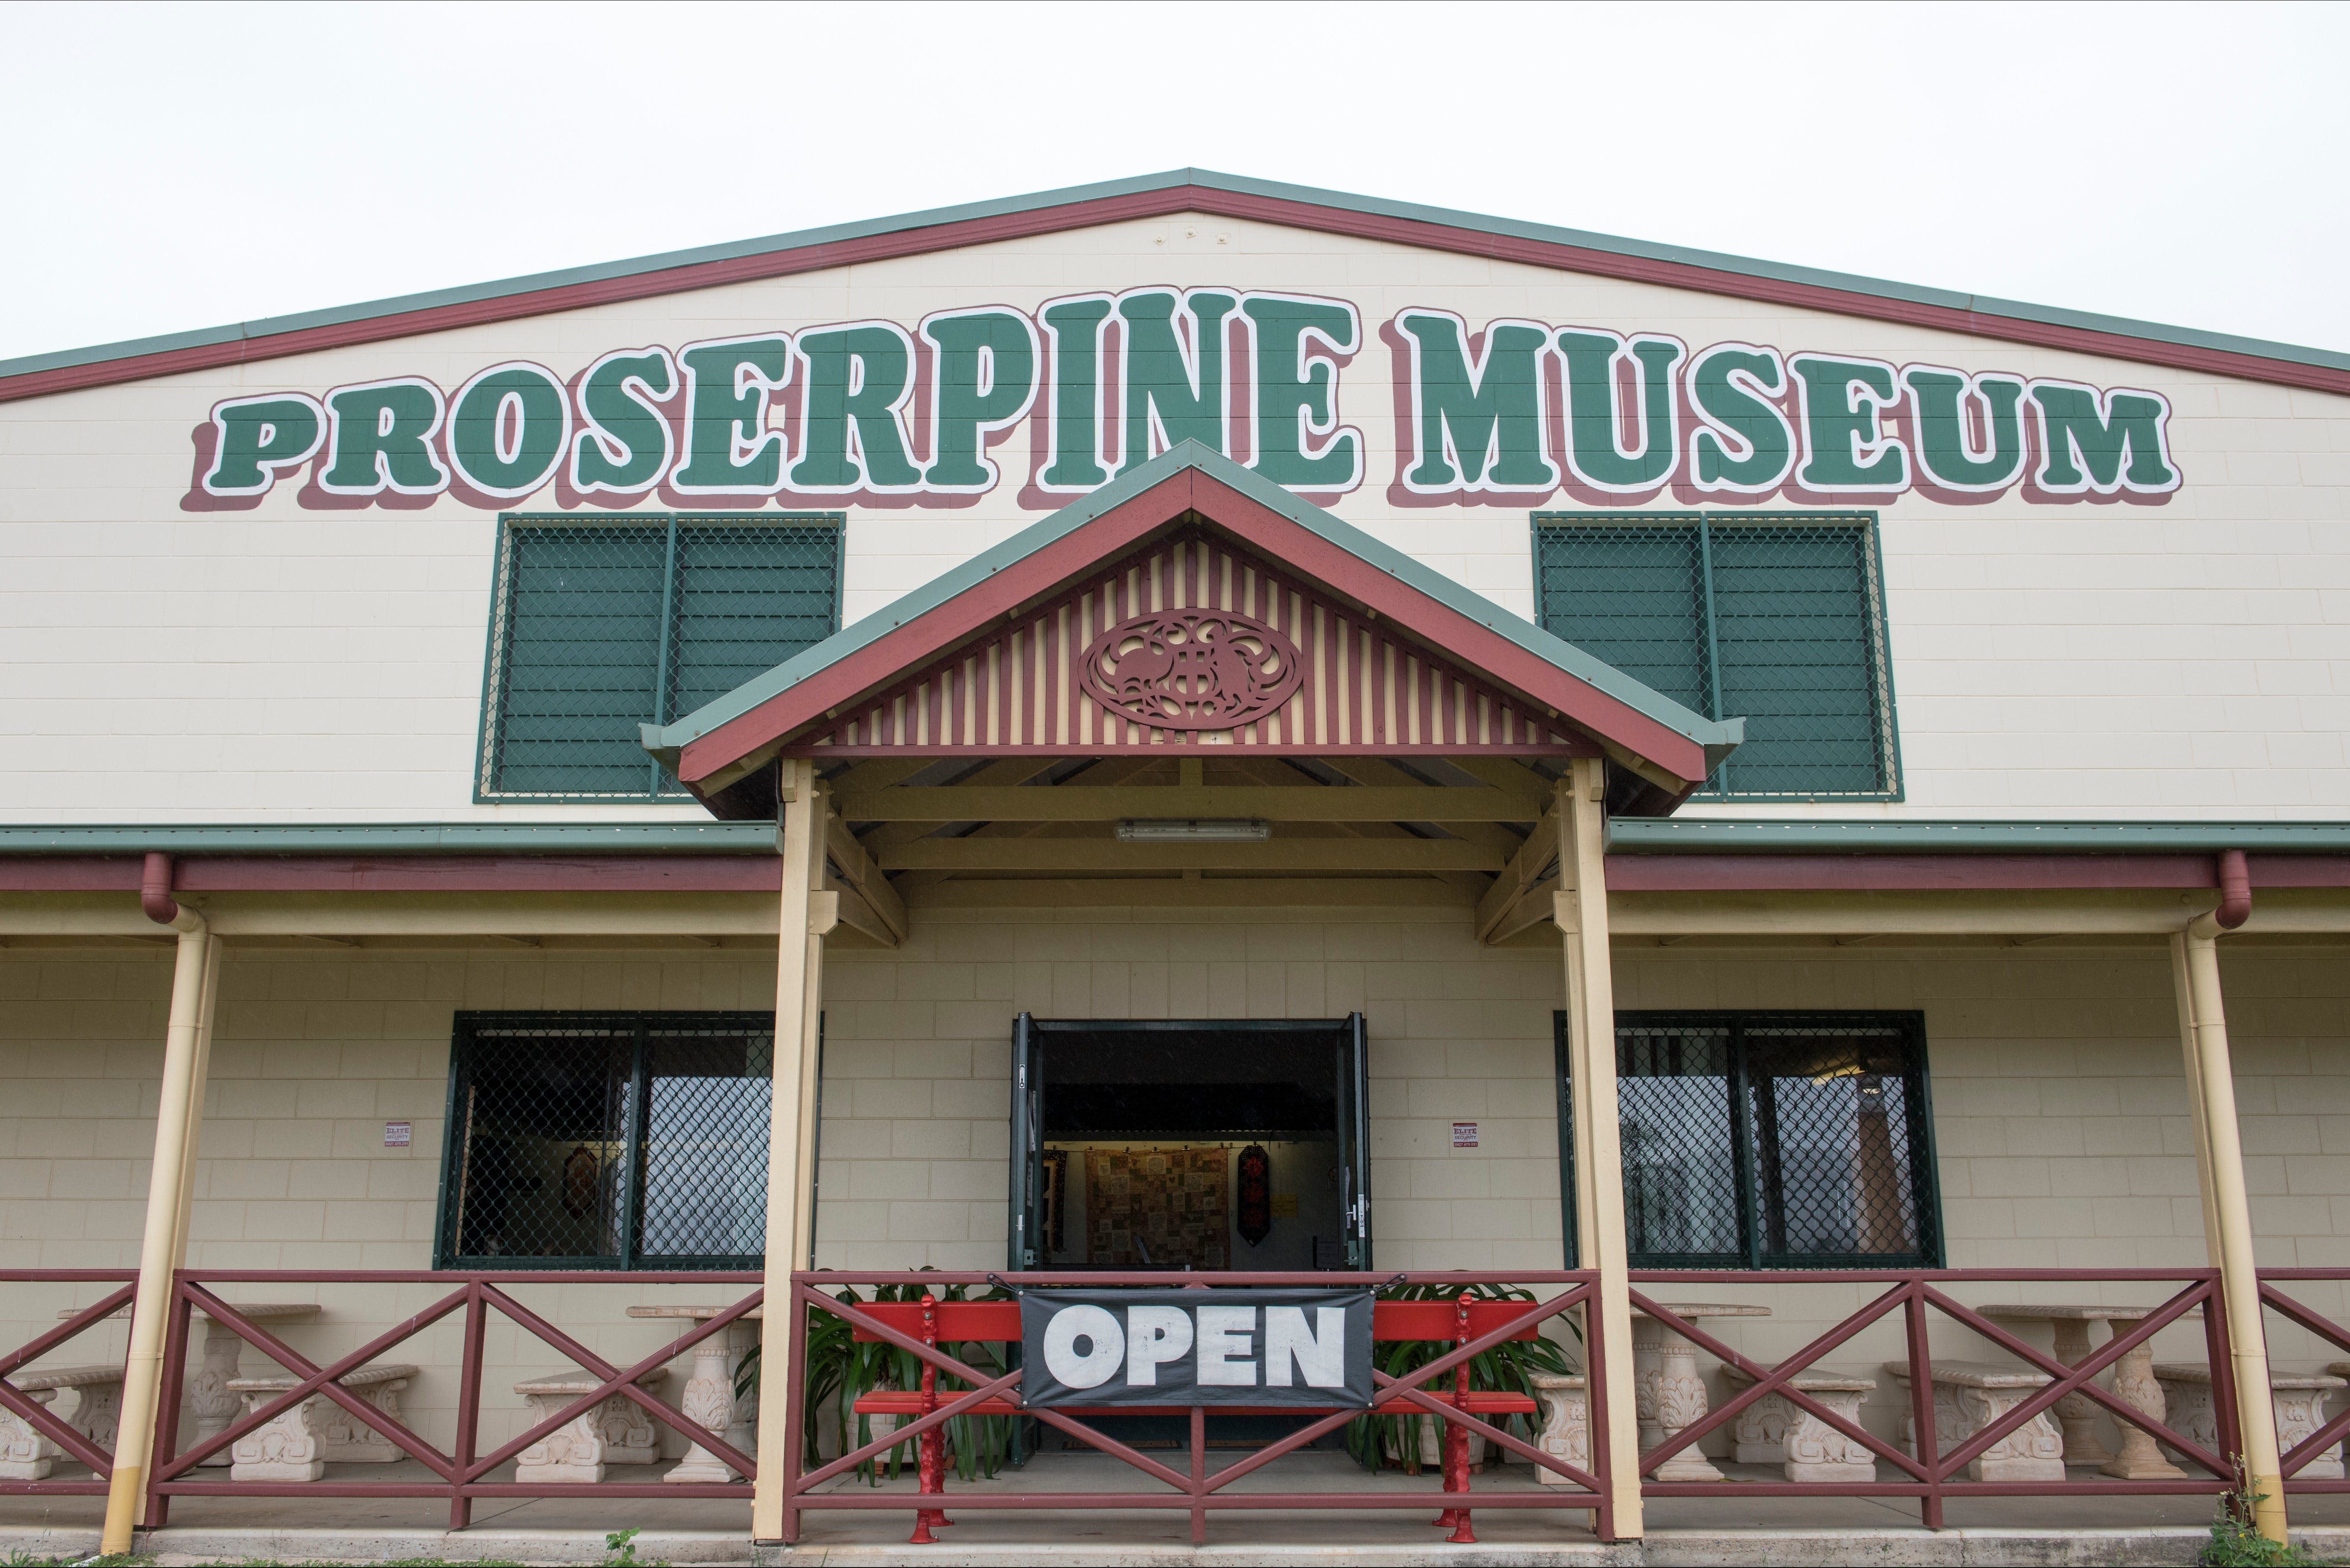 Proserpine Historical Museum - Find Attractions